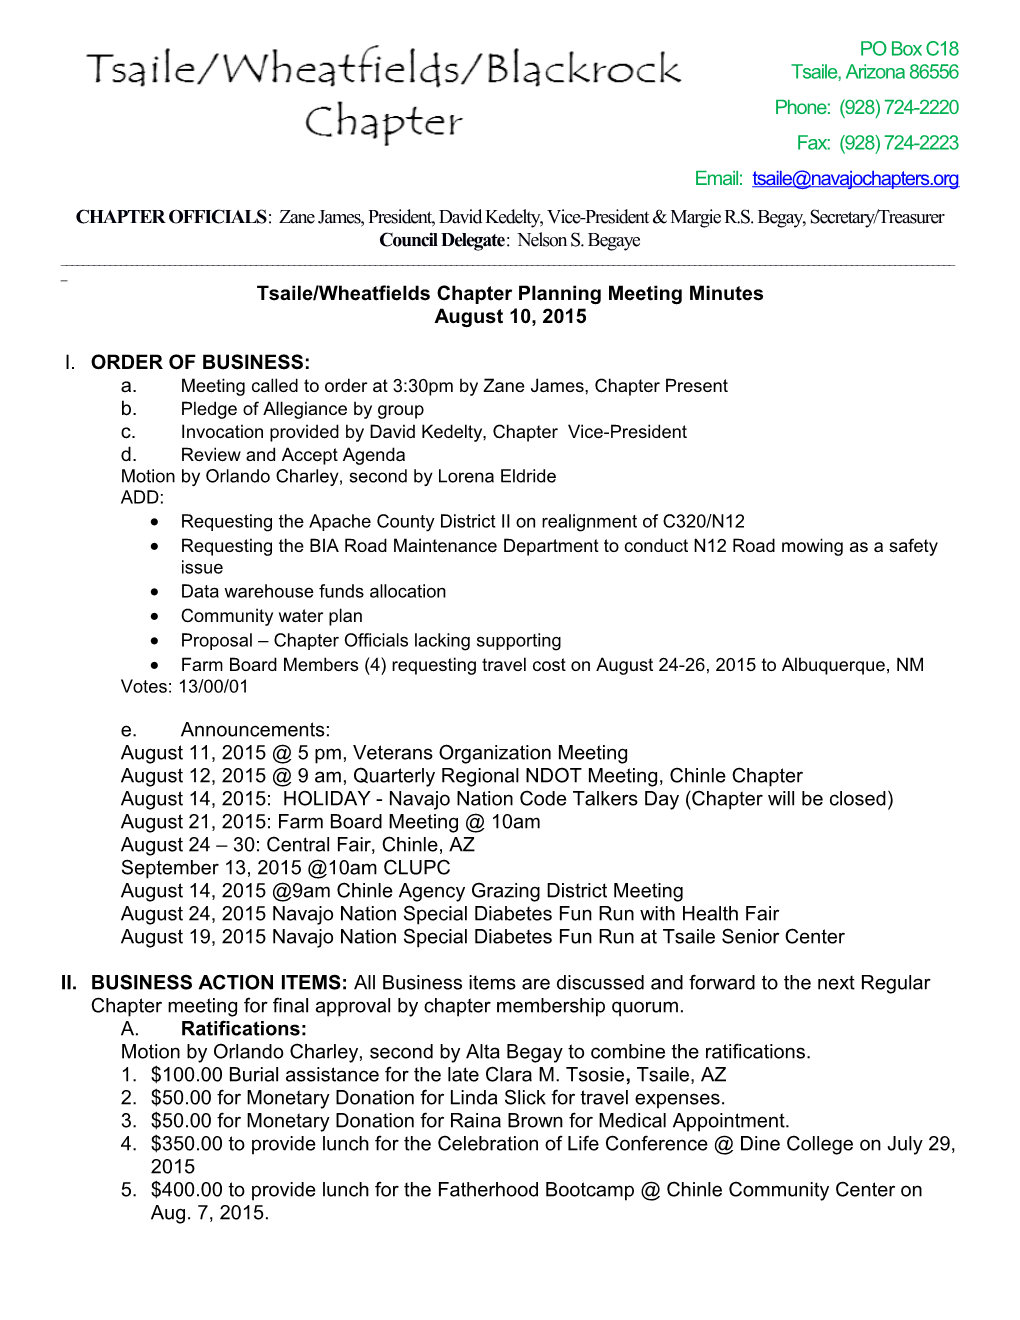 Tsaile/Wheatfields Chapter Planning Meeting Minutes